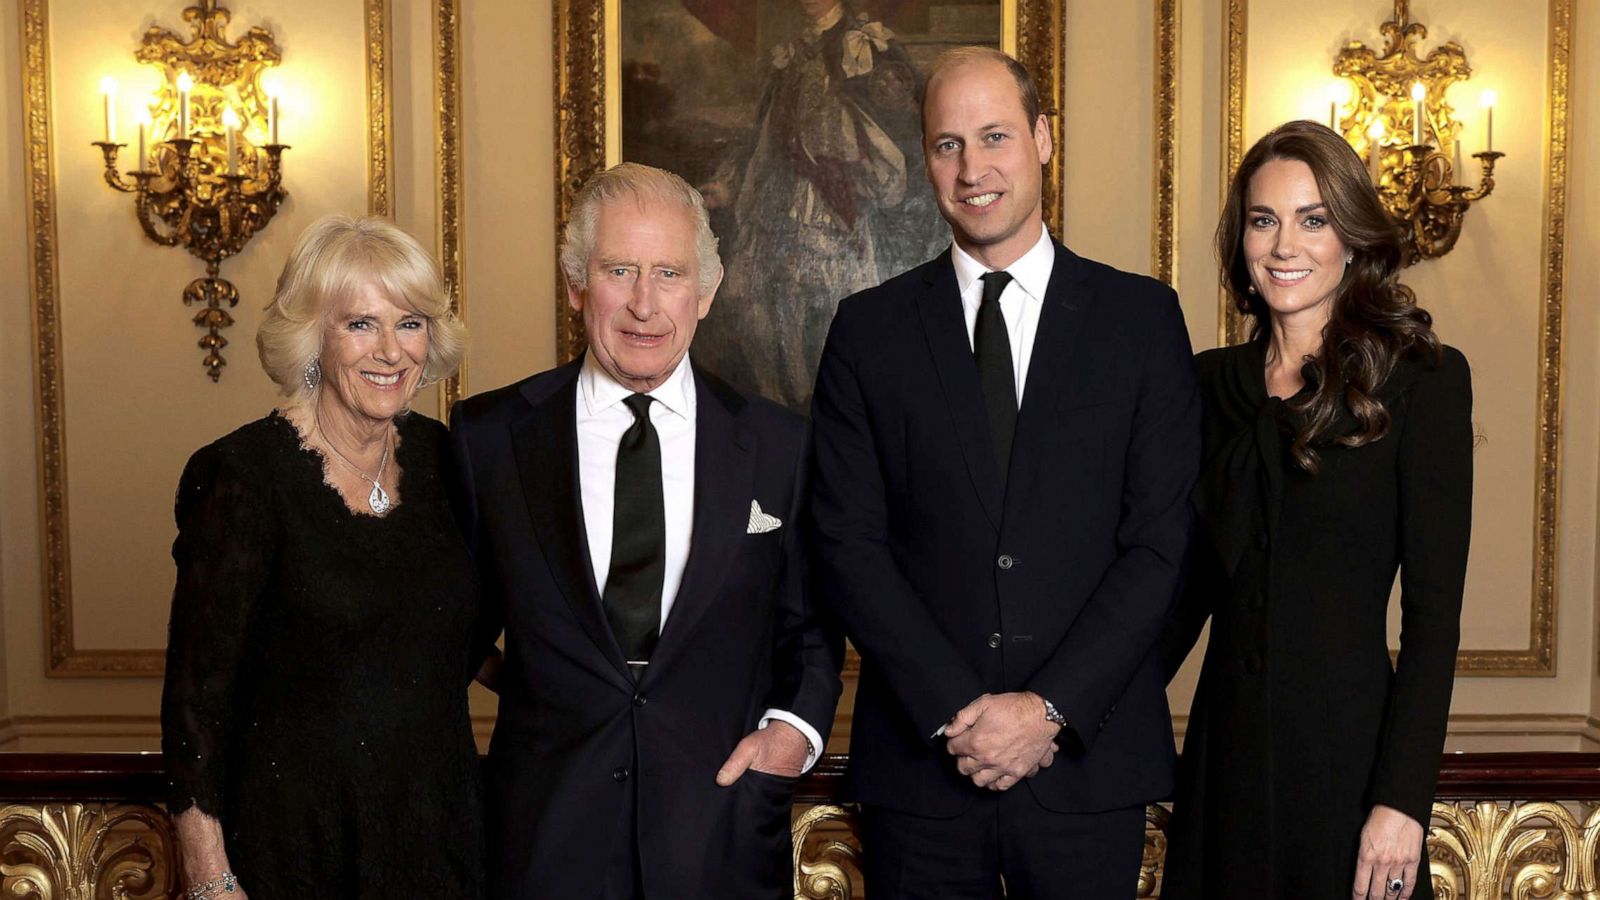 Portrait of the Queen and three future kings released, Monarchy